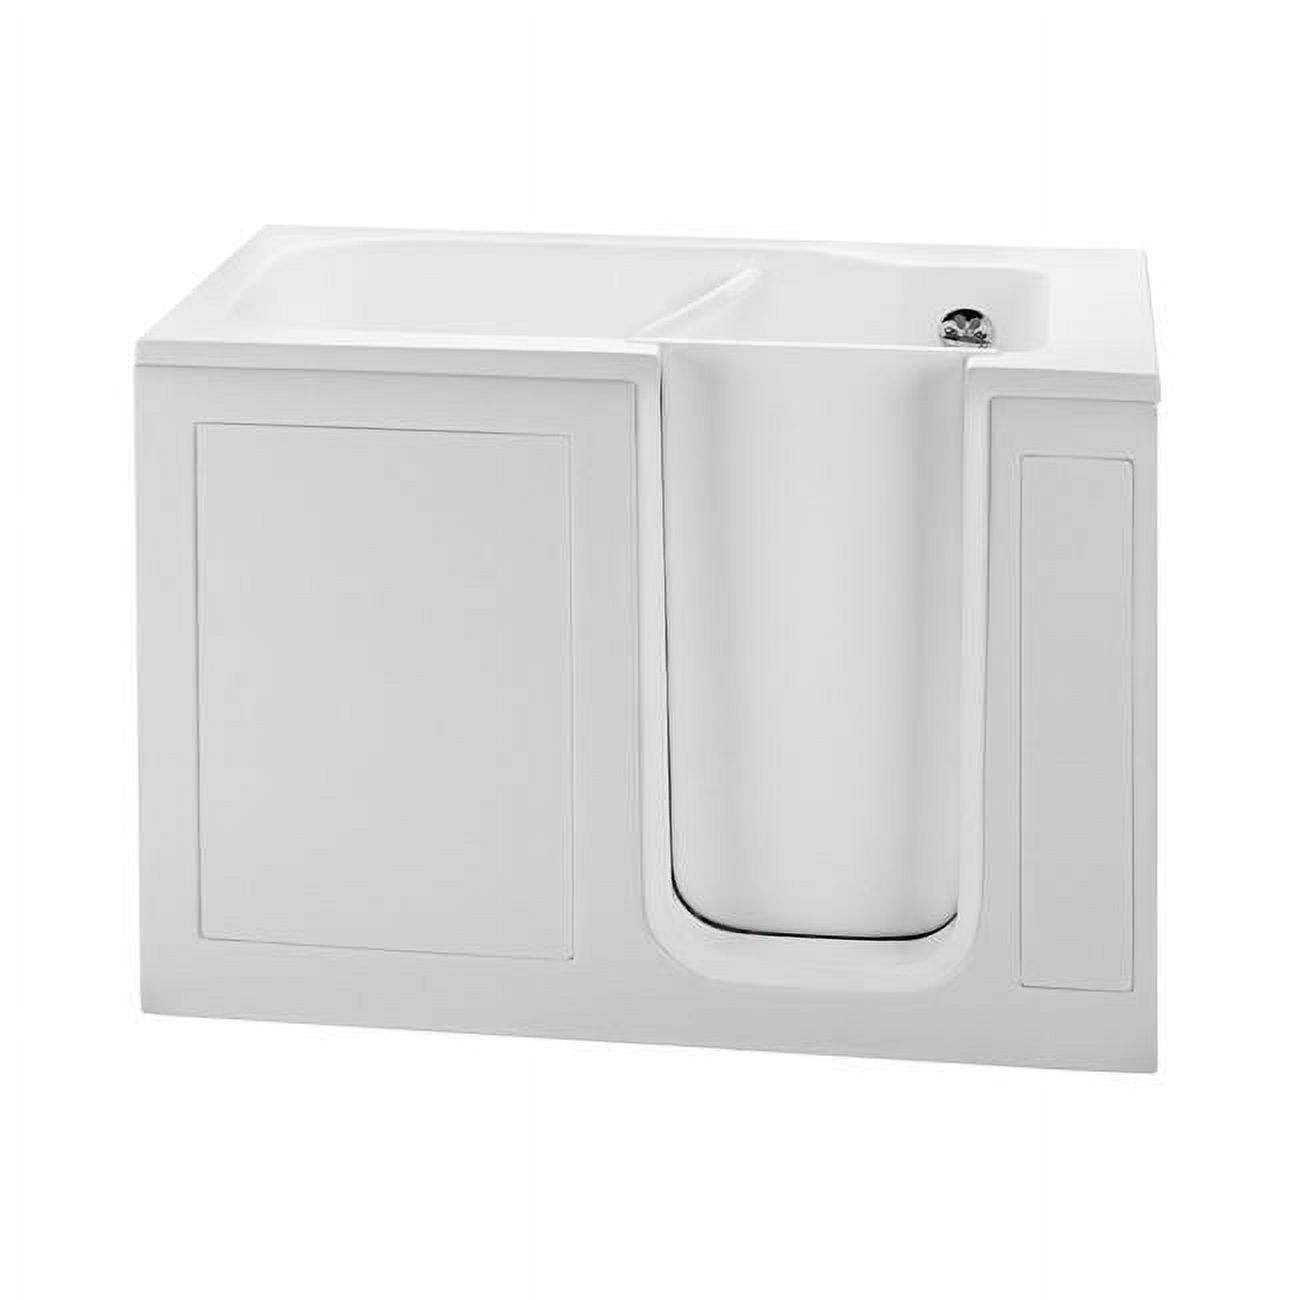 Walk in Whirlpool Bath No Valves, White - 51.5 x 30.25 x 37.5 in. - image 1 of 1